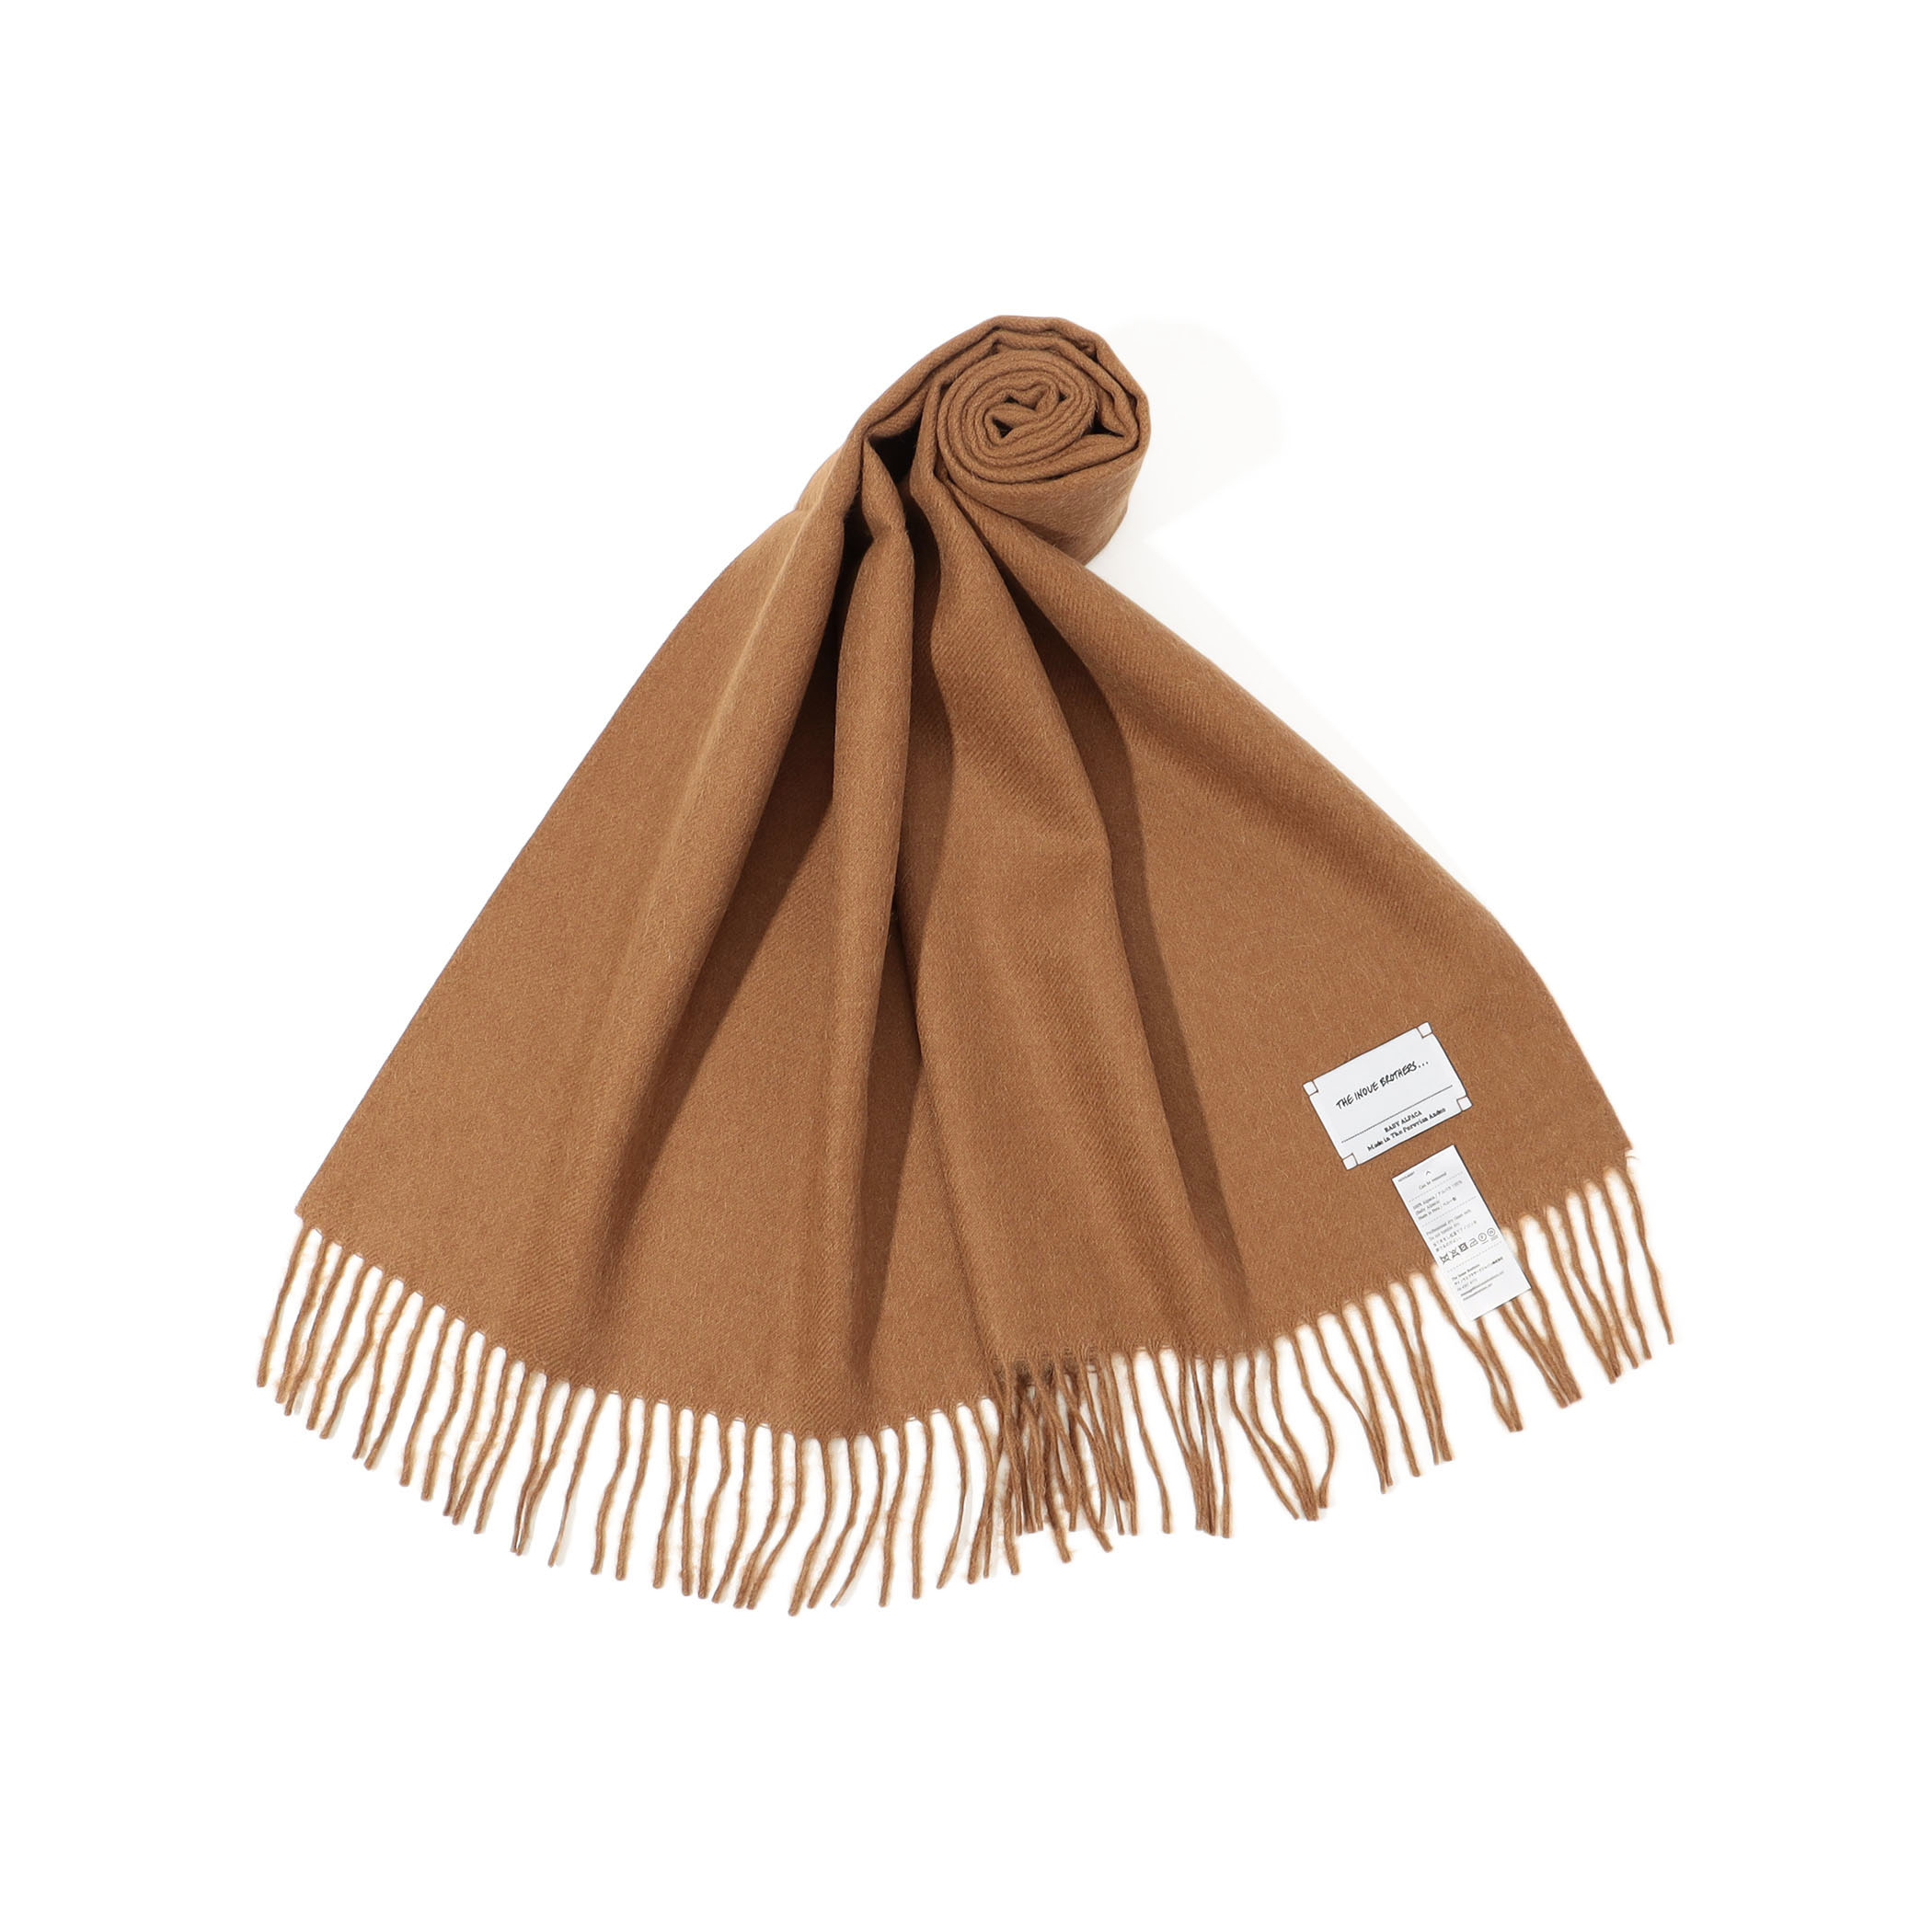 The Inoue Brothers Brushed Scarf